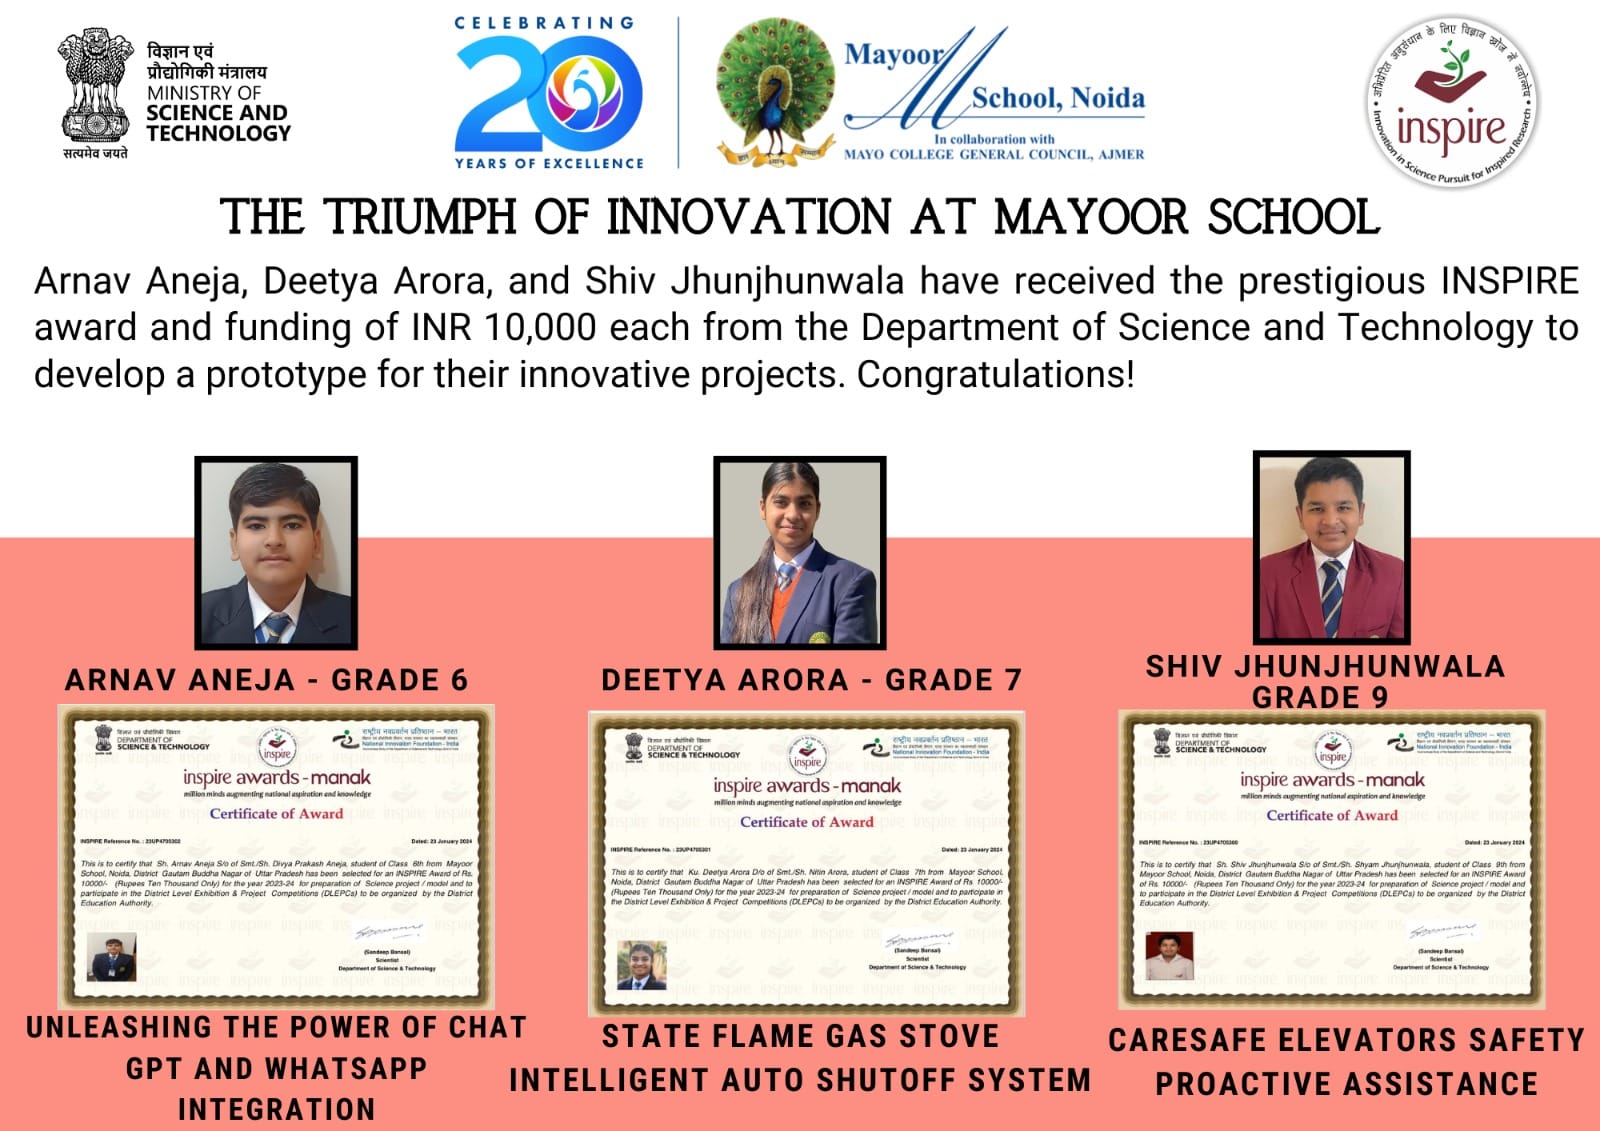 The Triumph of Innovation at Mayoor School